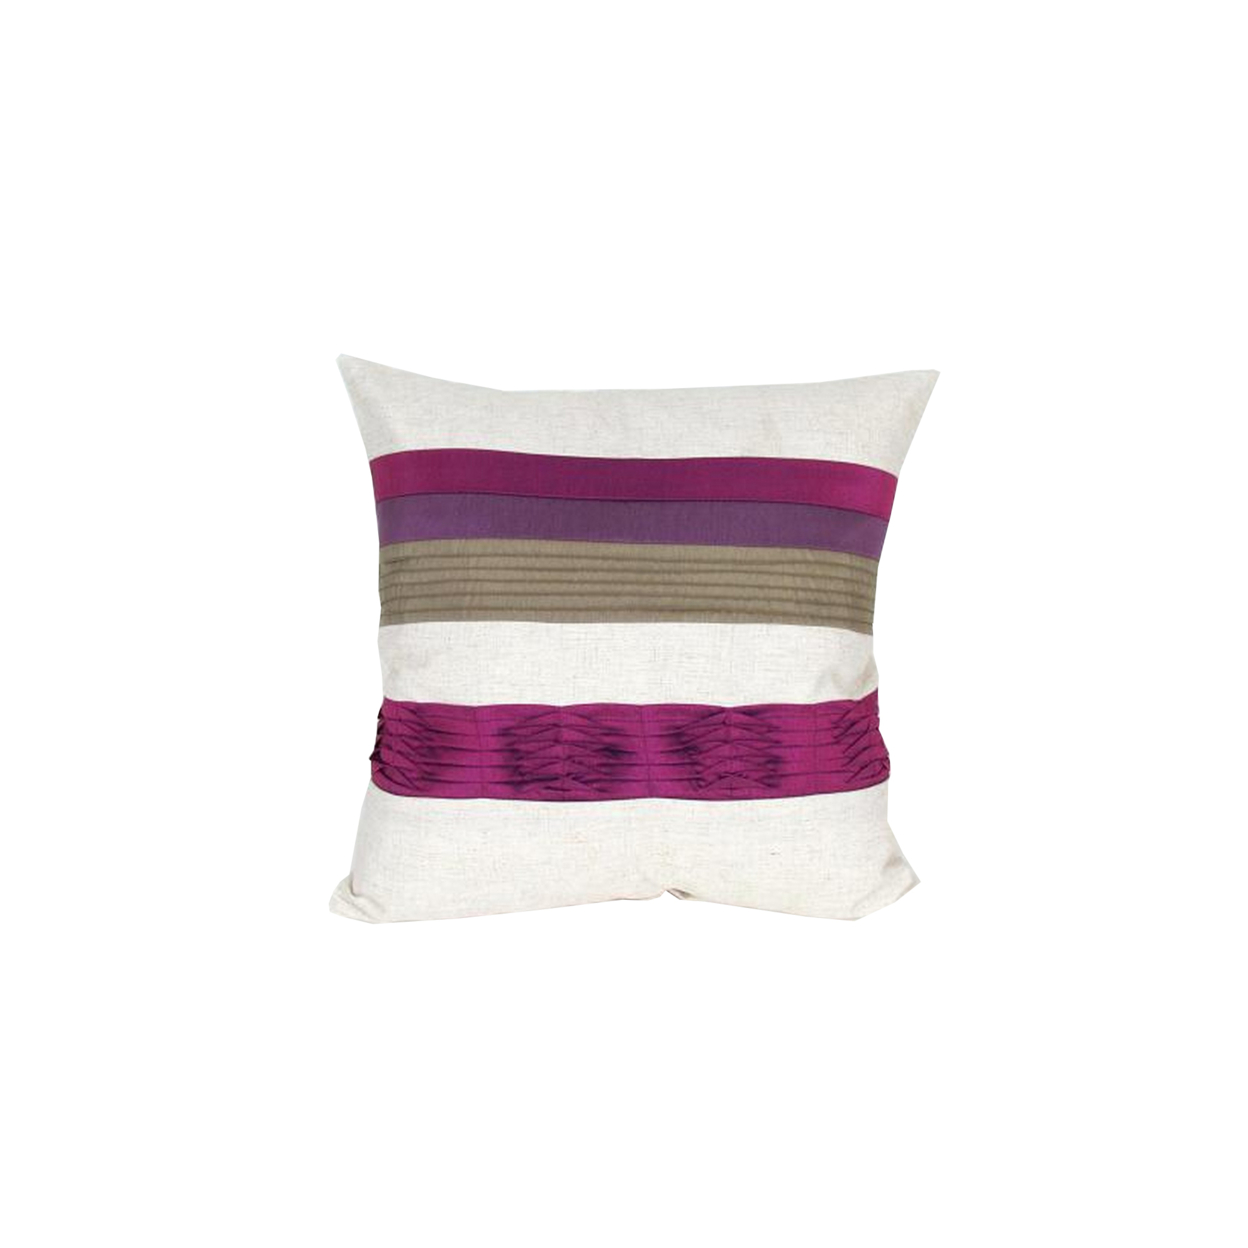 Fabric Accent Pillow With Piping Work,White And Purple- Saltoro Sherpi